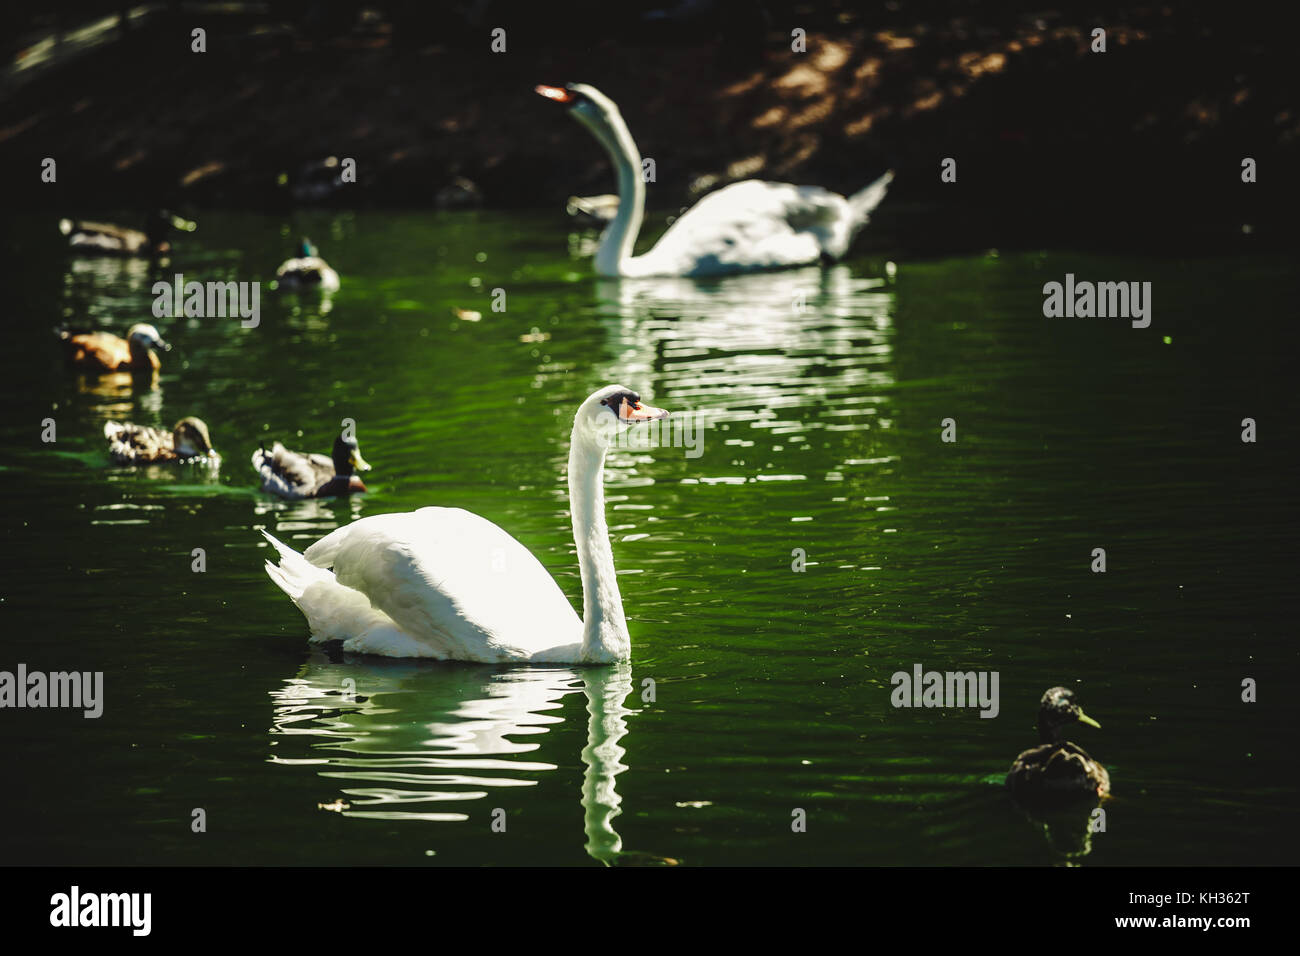 White swan on foreground, ducks and a variety of birds in the background Stock Photo